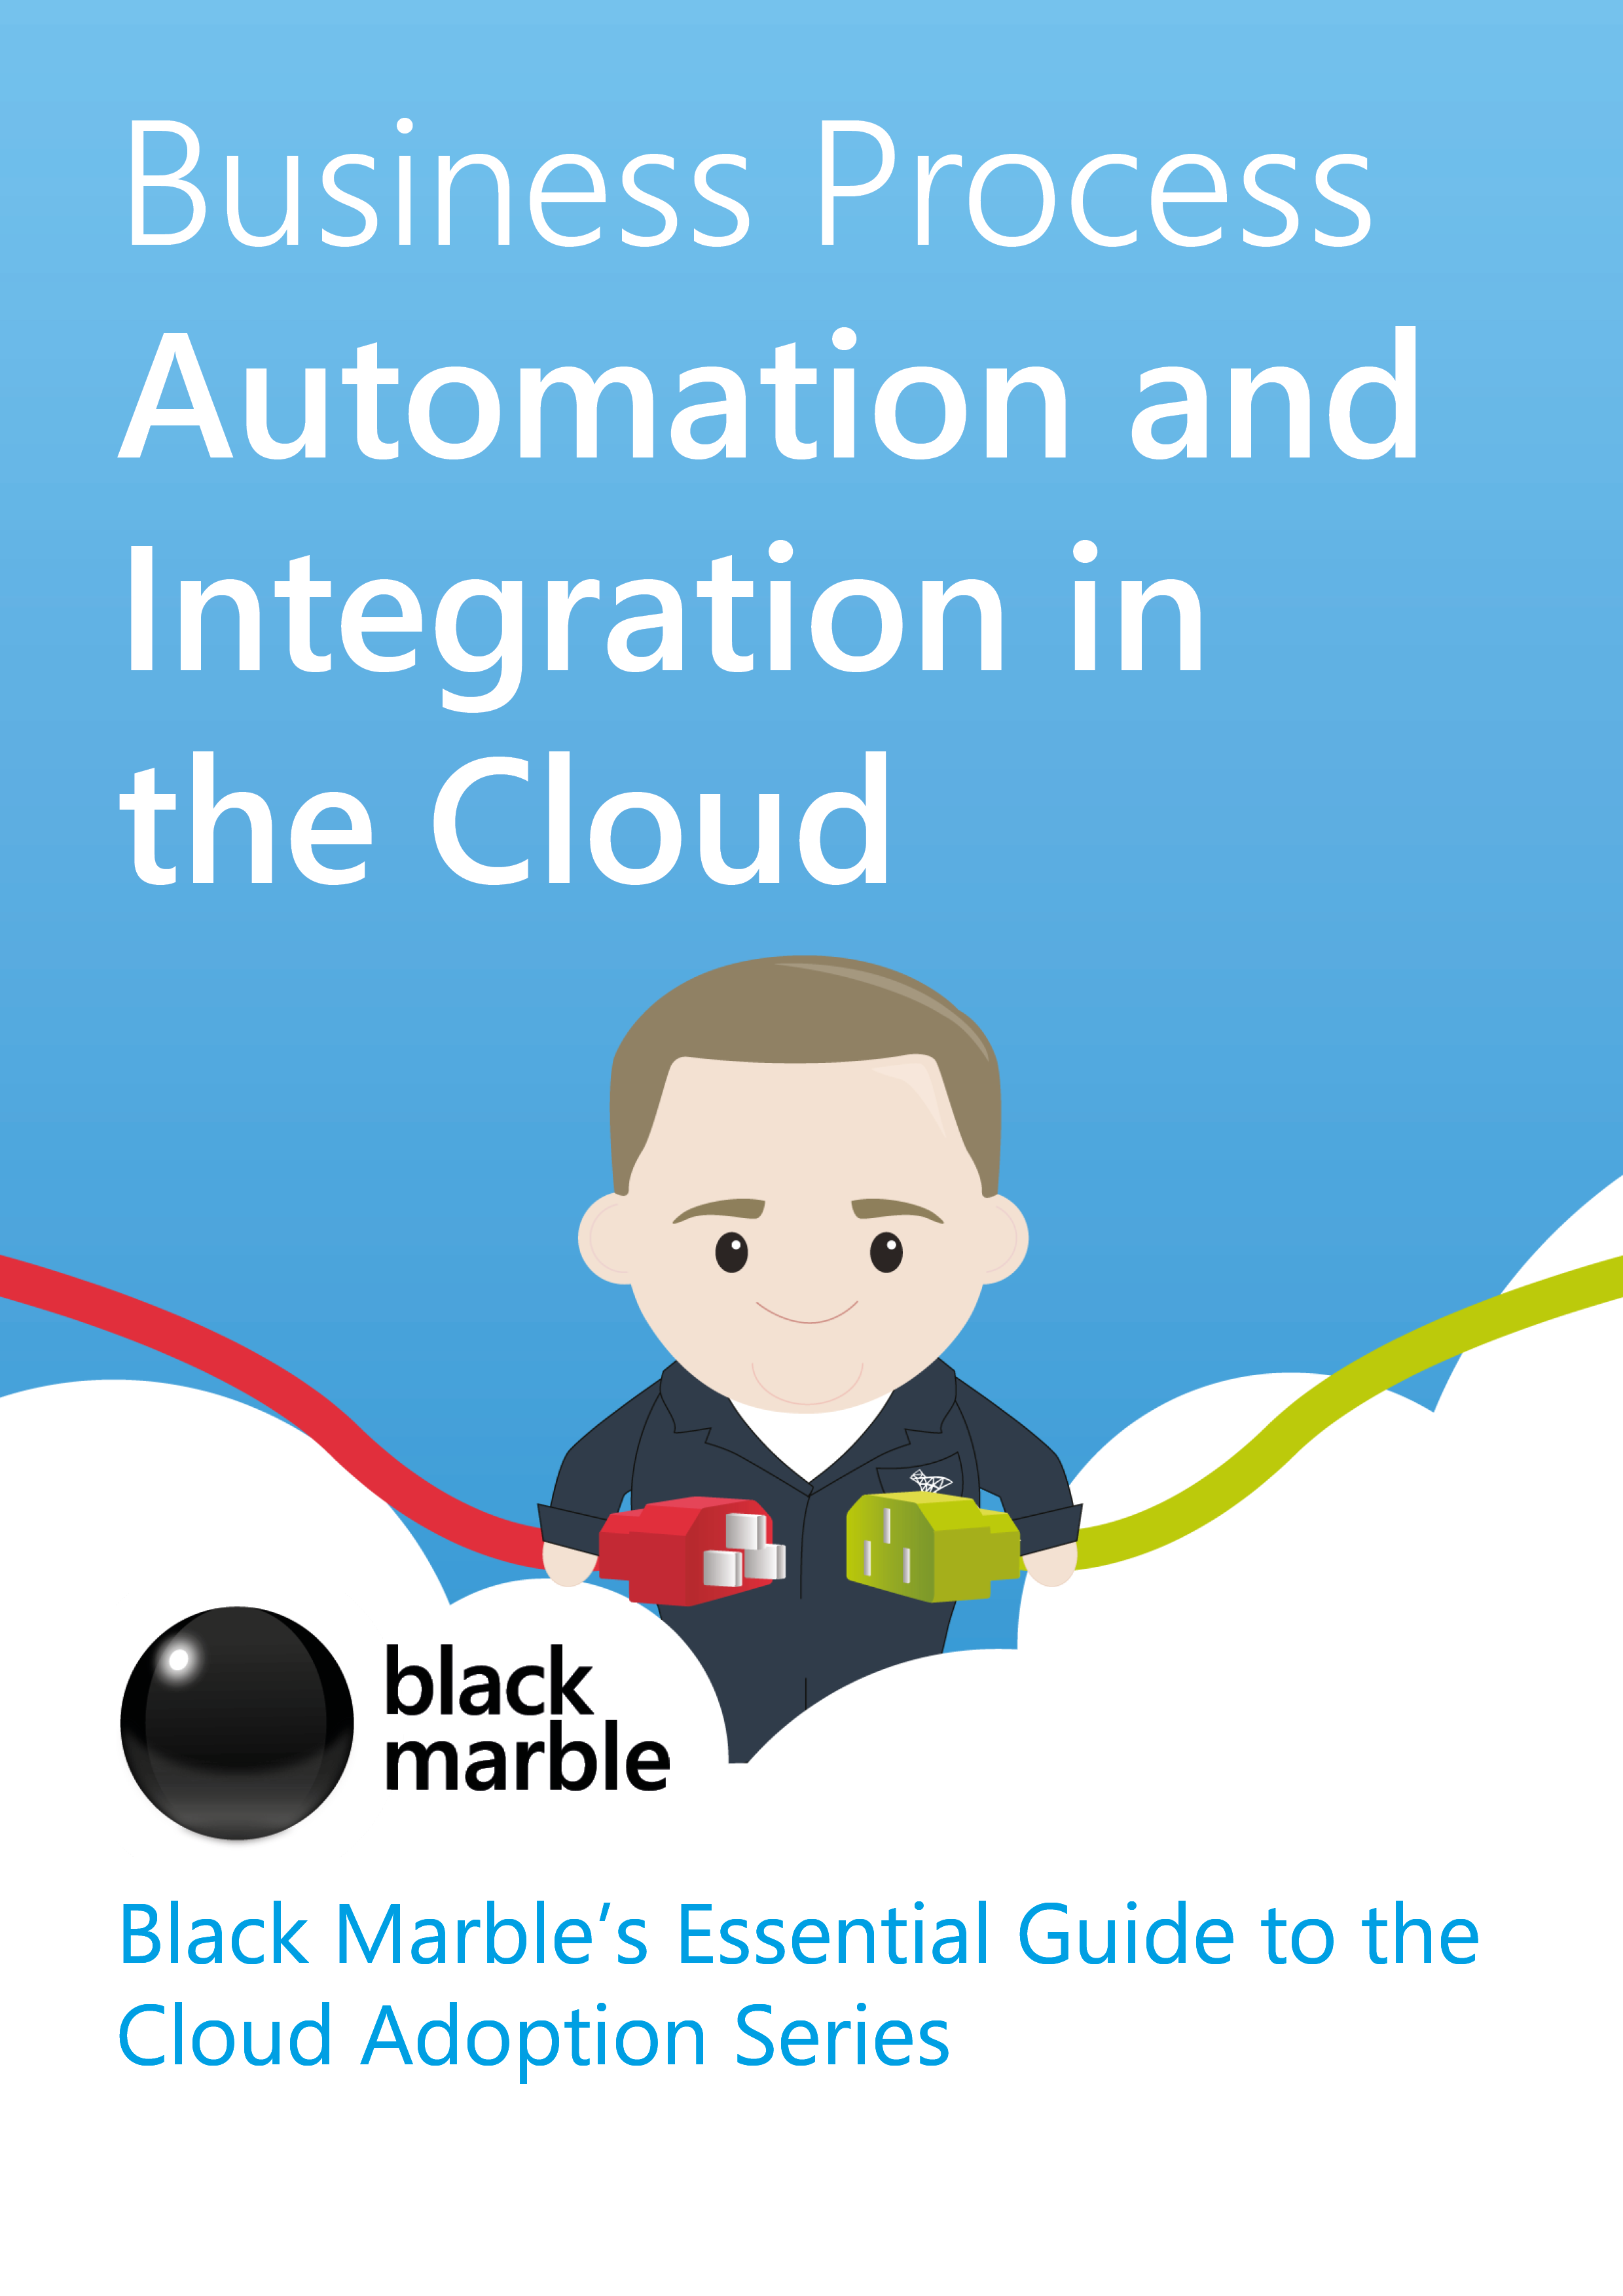 Business Process Automation and Integration in the Cloud